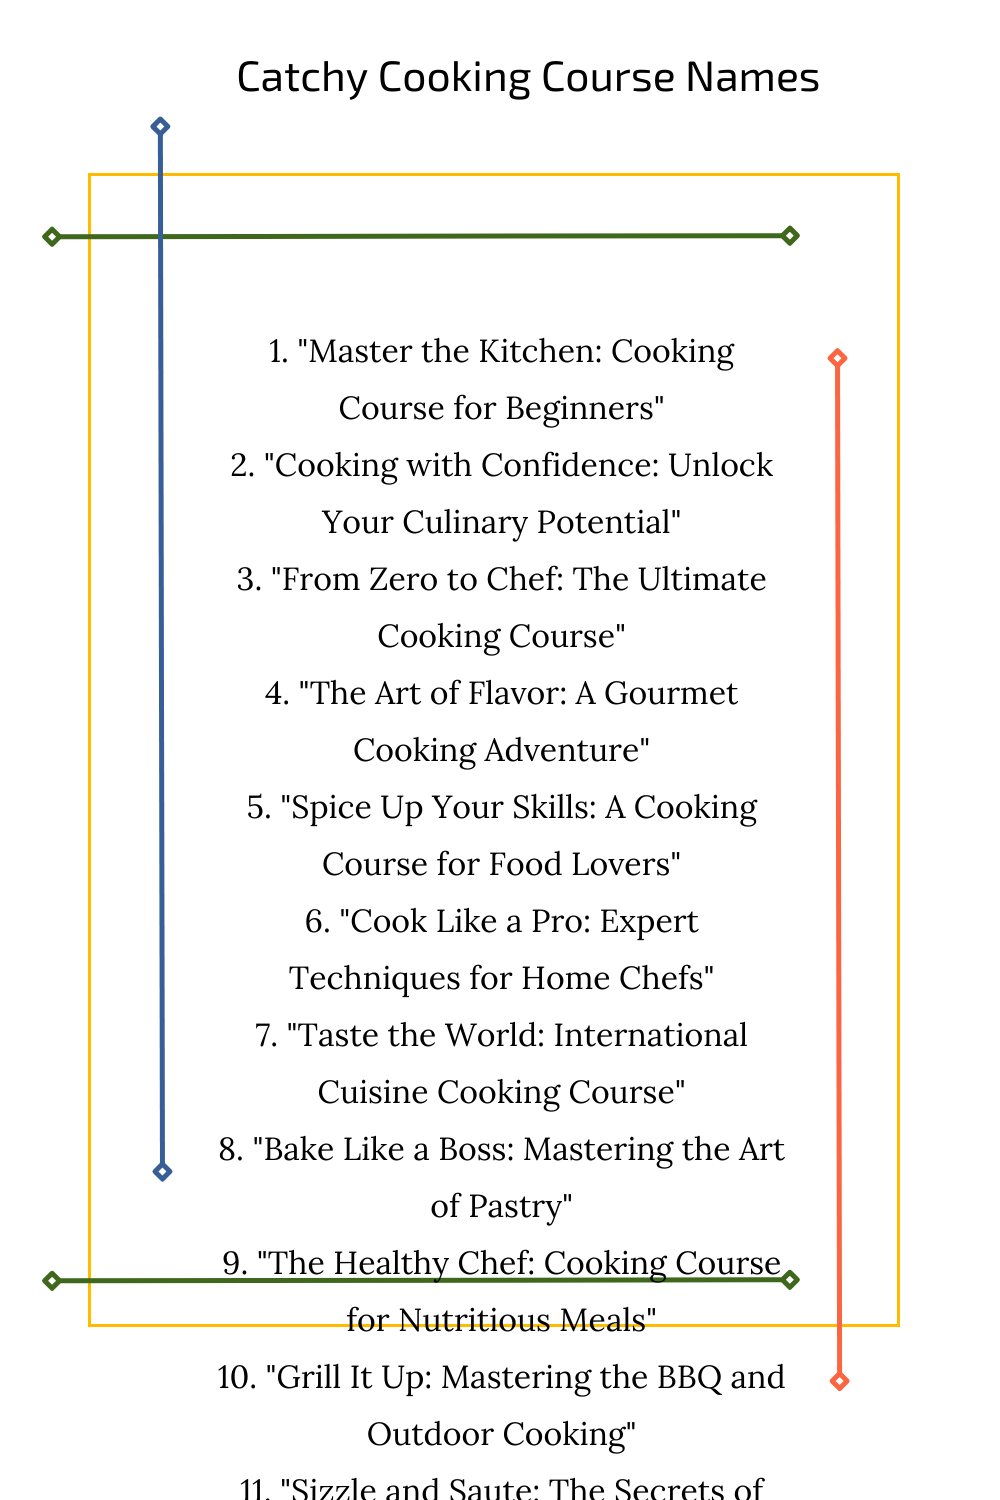 Catchy Cooking Course Names